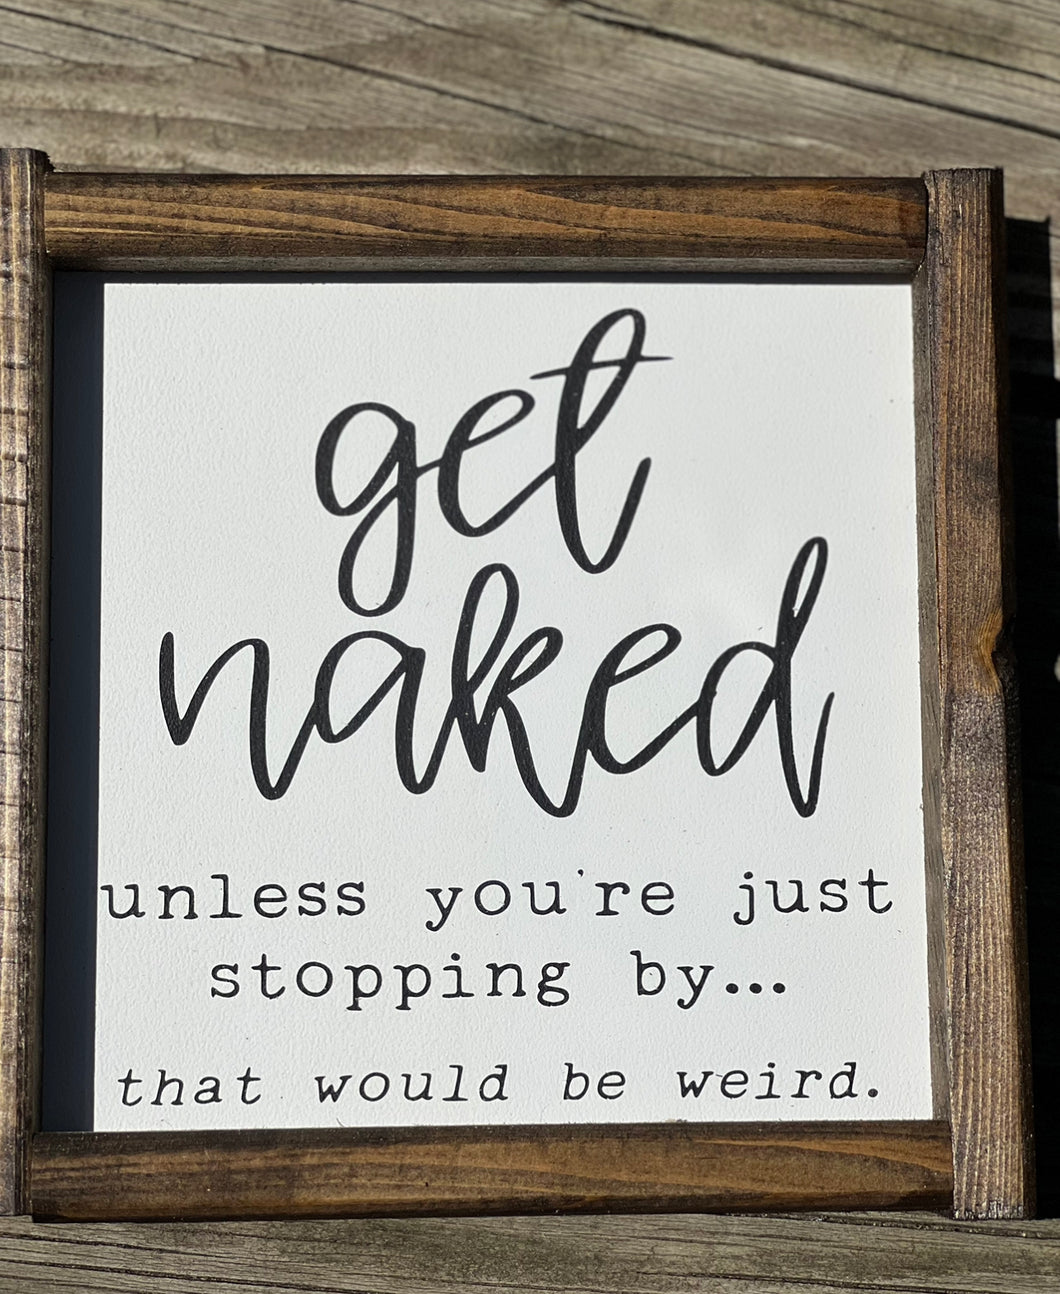 Get Naked Unless you're just stopping by... that would be weird.